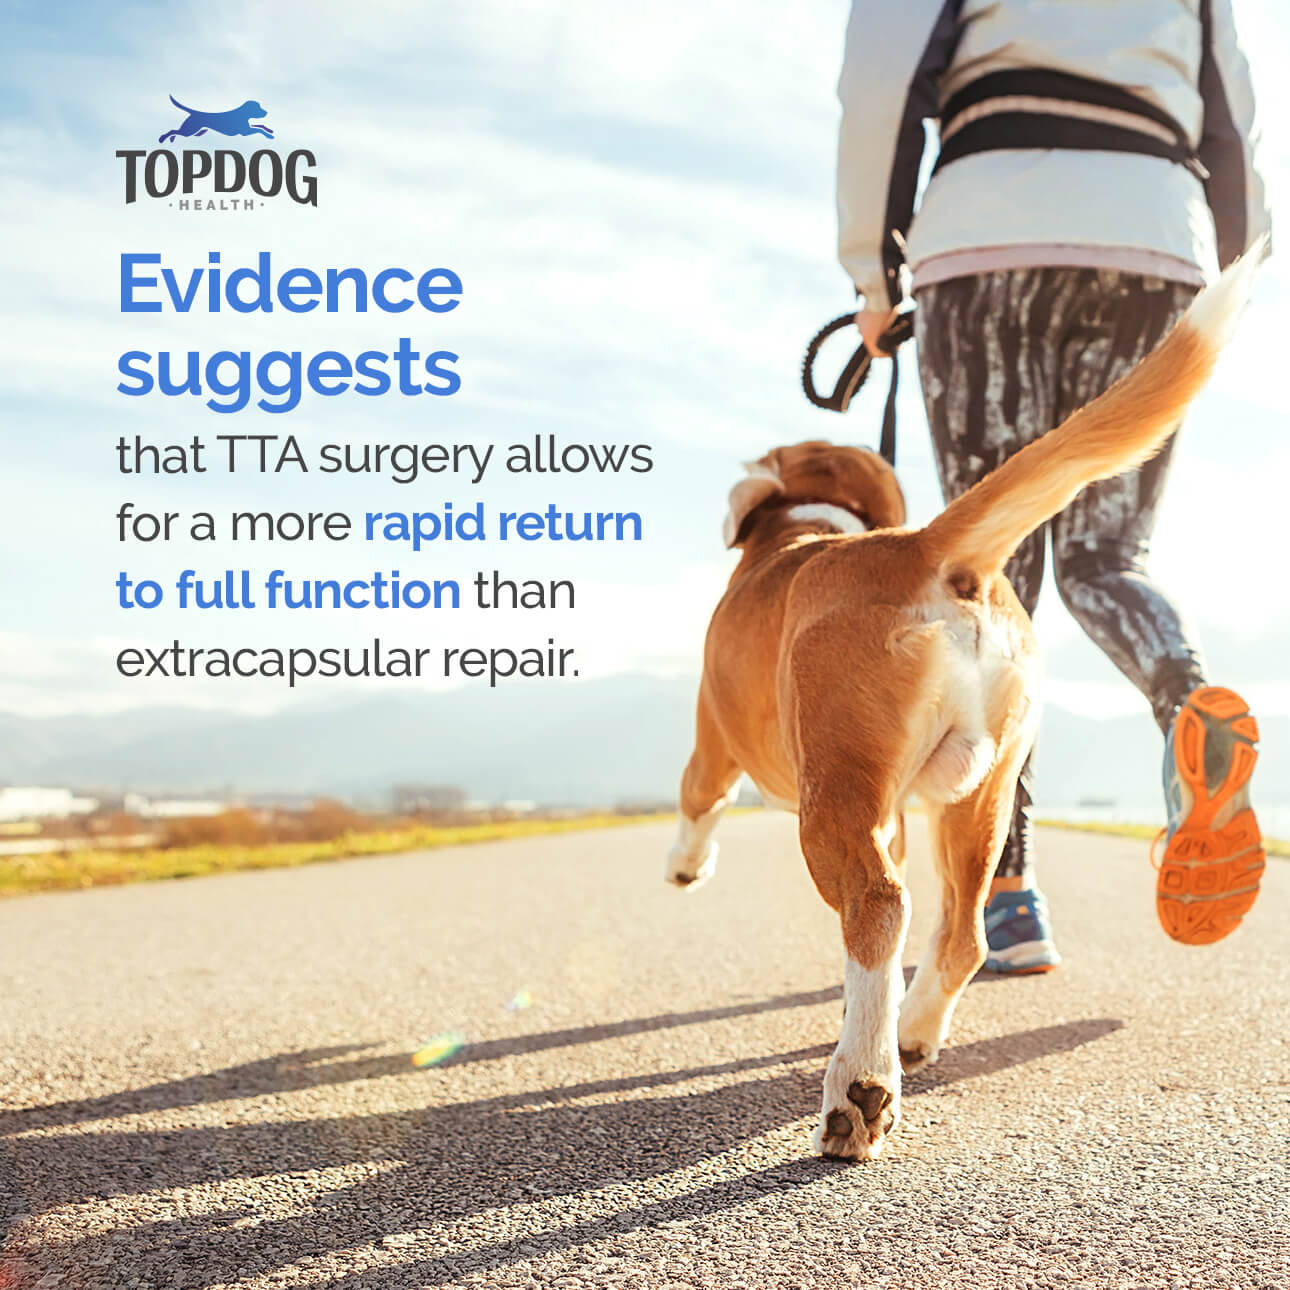 tta surgery allows for rapid return to function